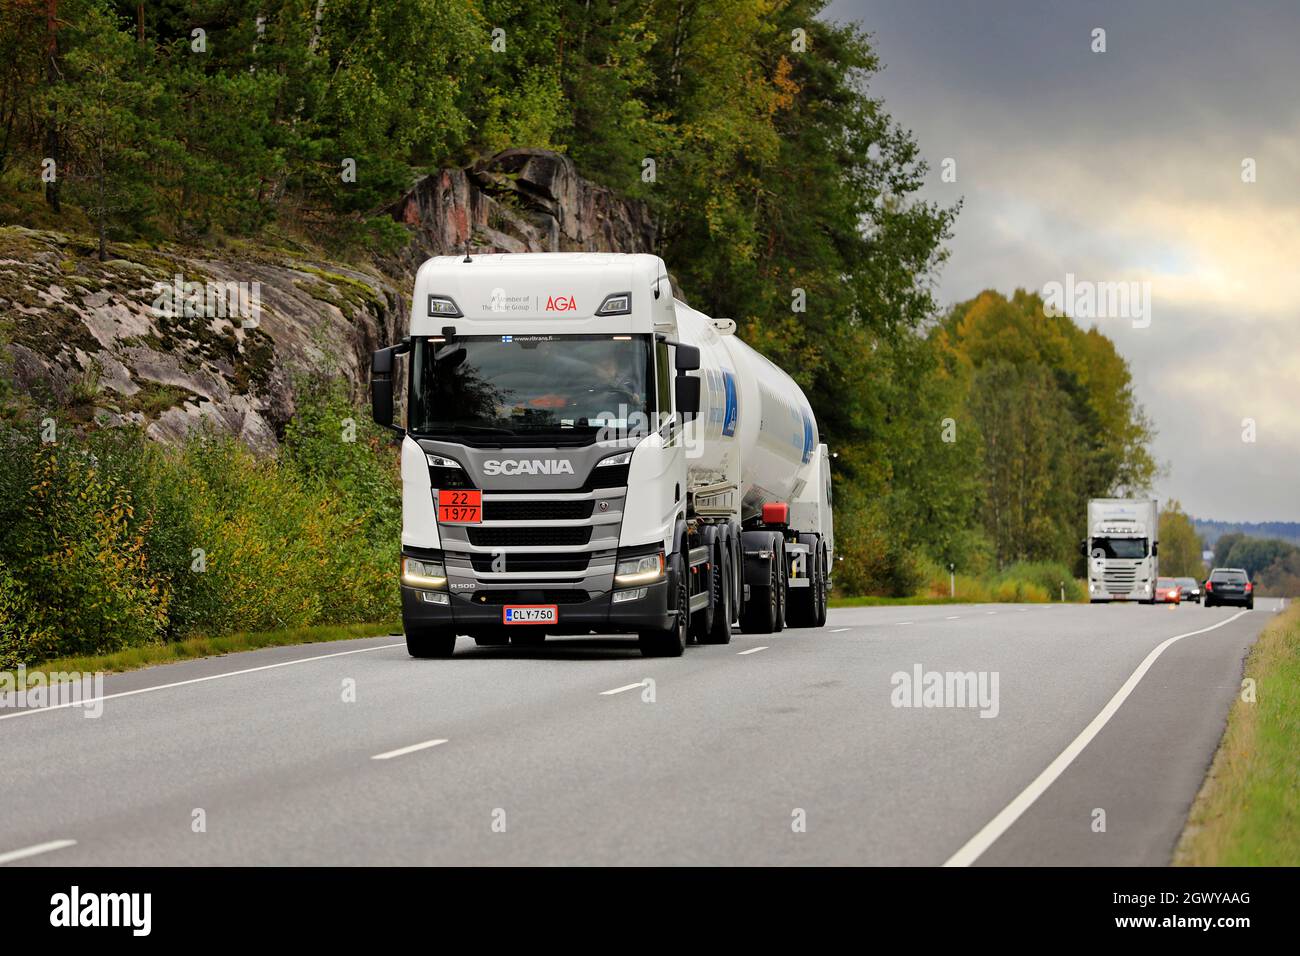 White Scania R500 tank truck for AGA gas transport on road. ADR code  22-1977 signifies Nitrogen, refrigerated liquid. Salo, Finland. Sept 23,  2021 Stock Photo - Alamy